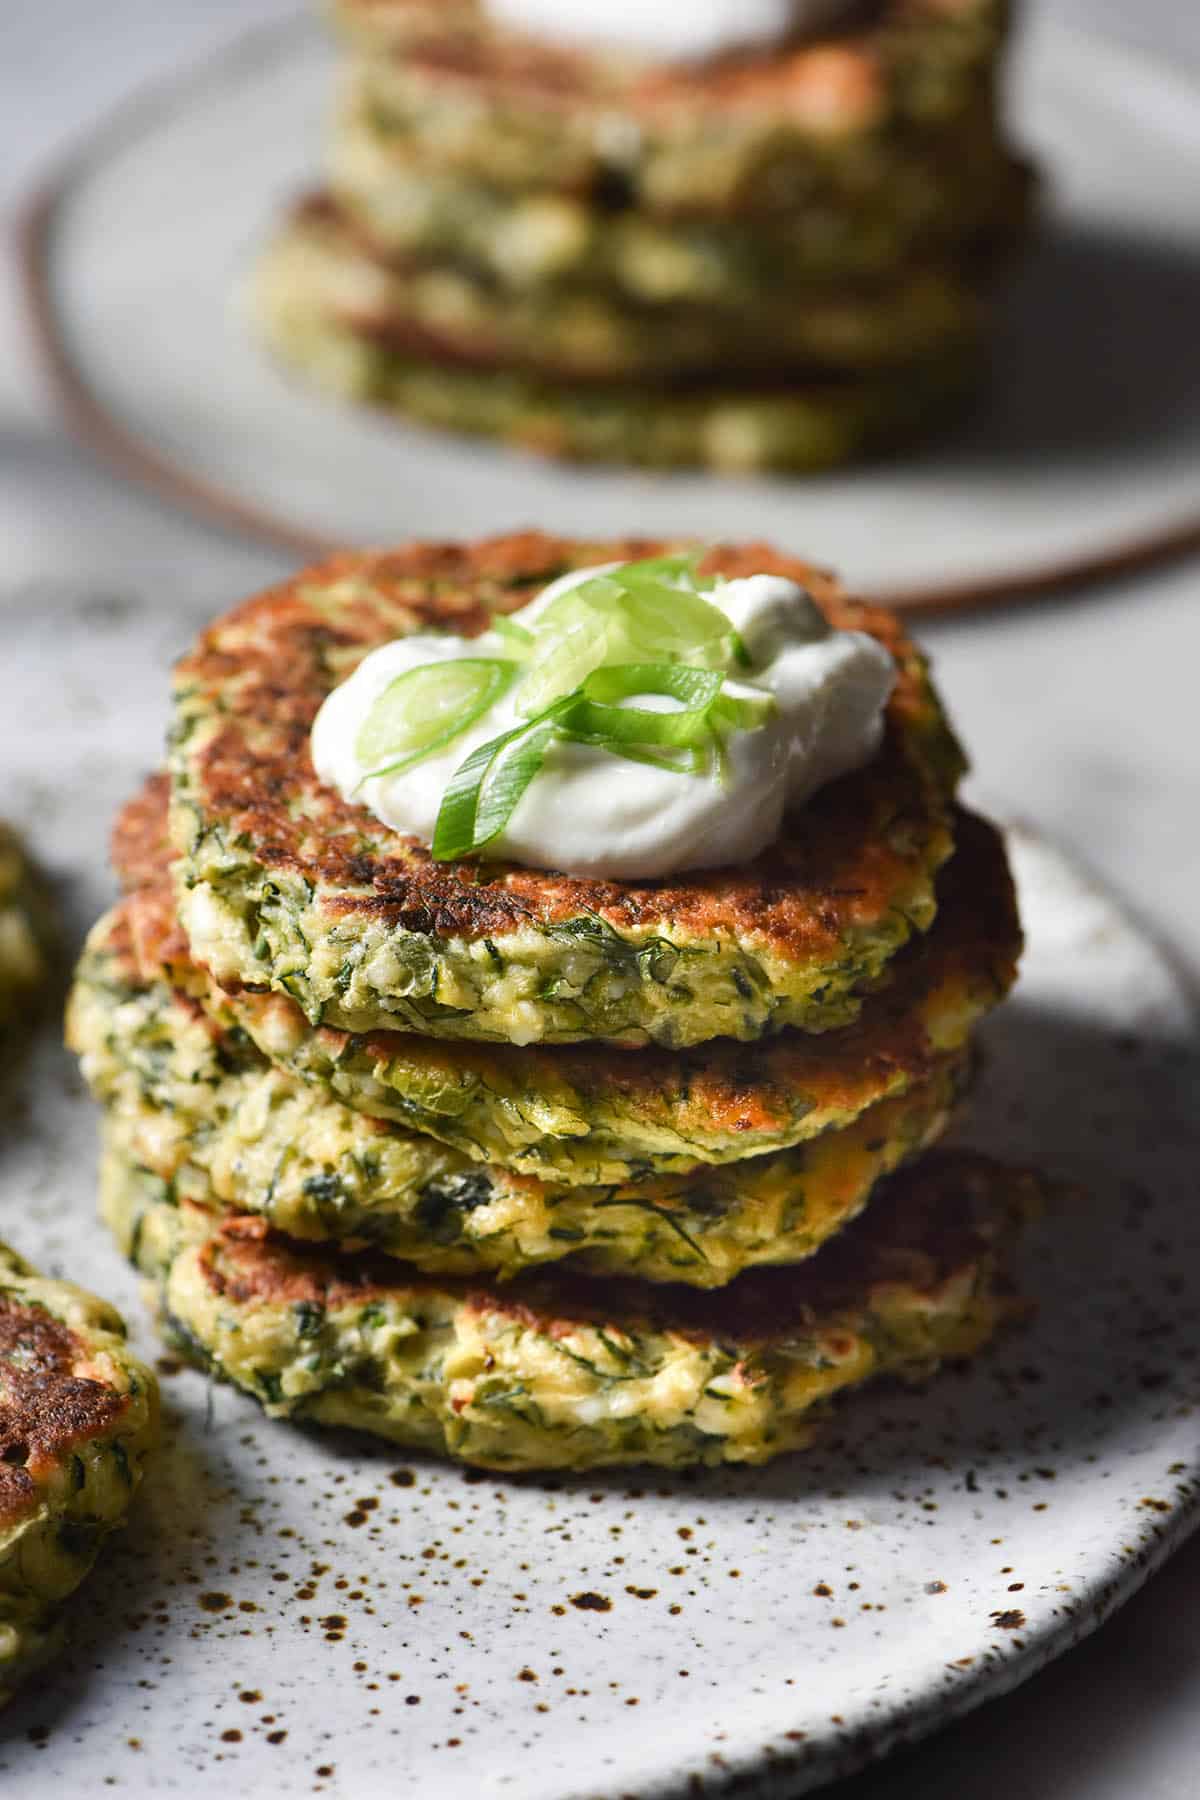 A side on view of a stack of gluten free zucchini fritters on a white speckled ceramic plate atop a white marble table. The stack is topped with a dollop of yoghurt and spring onion greens, and a second stack on a white plate sits in the background